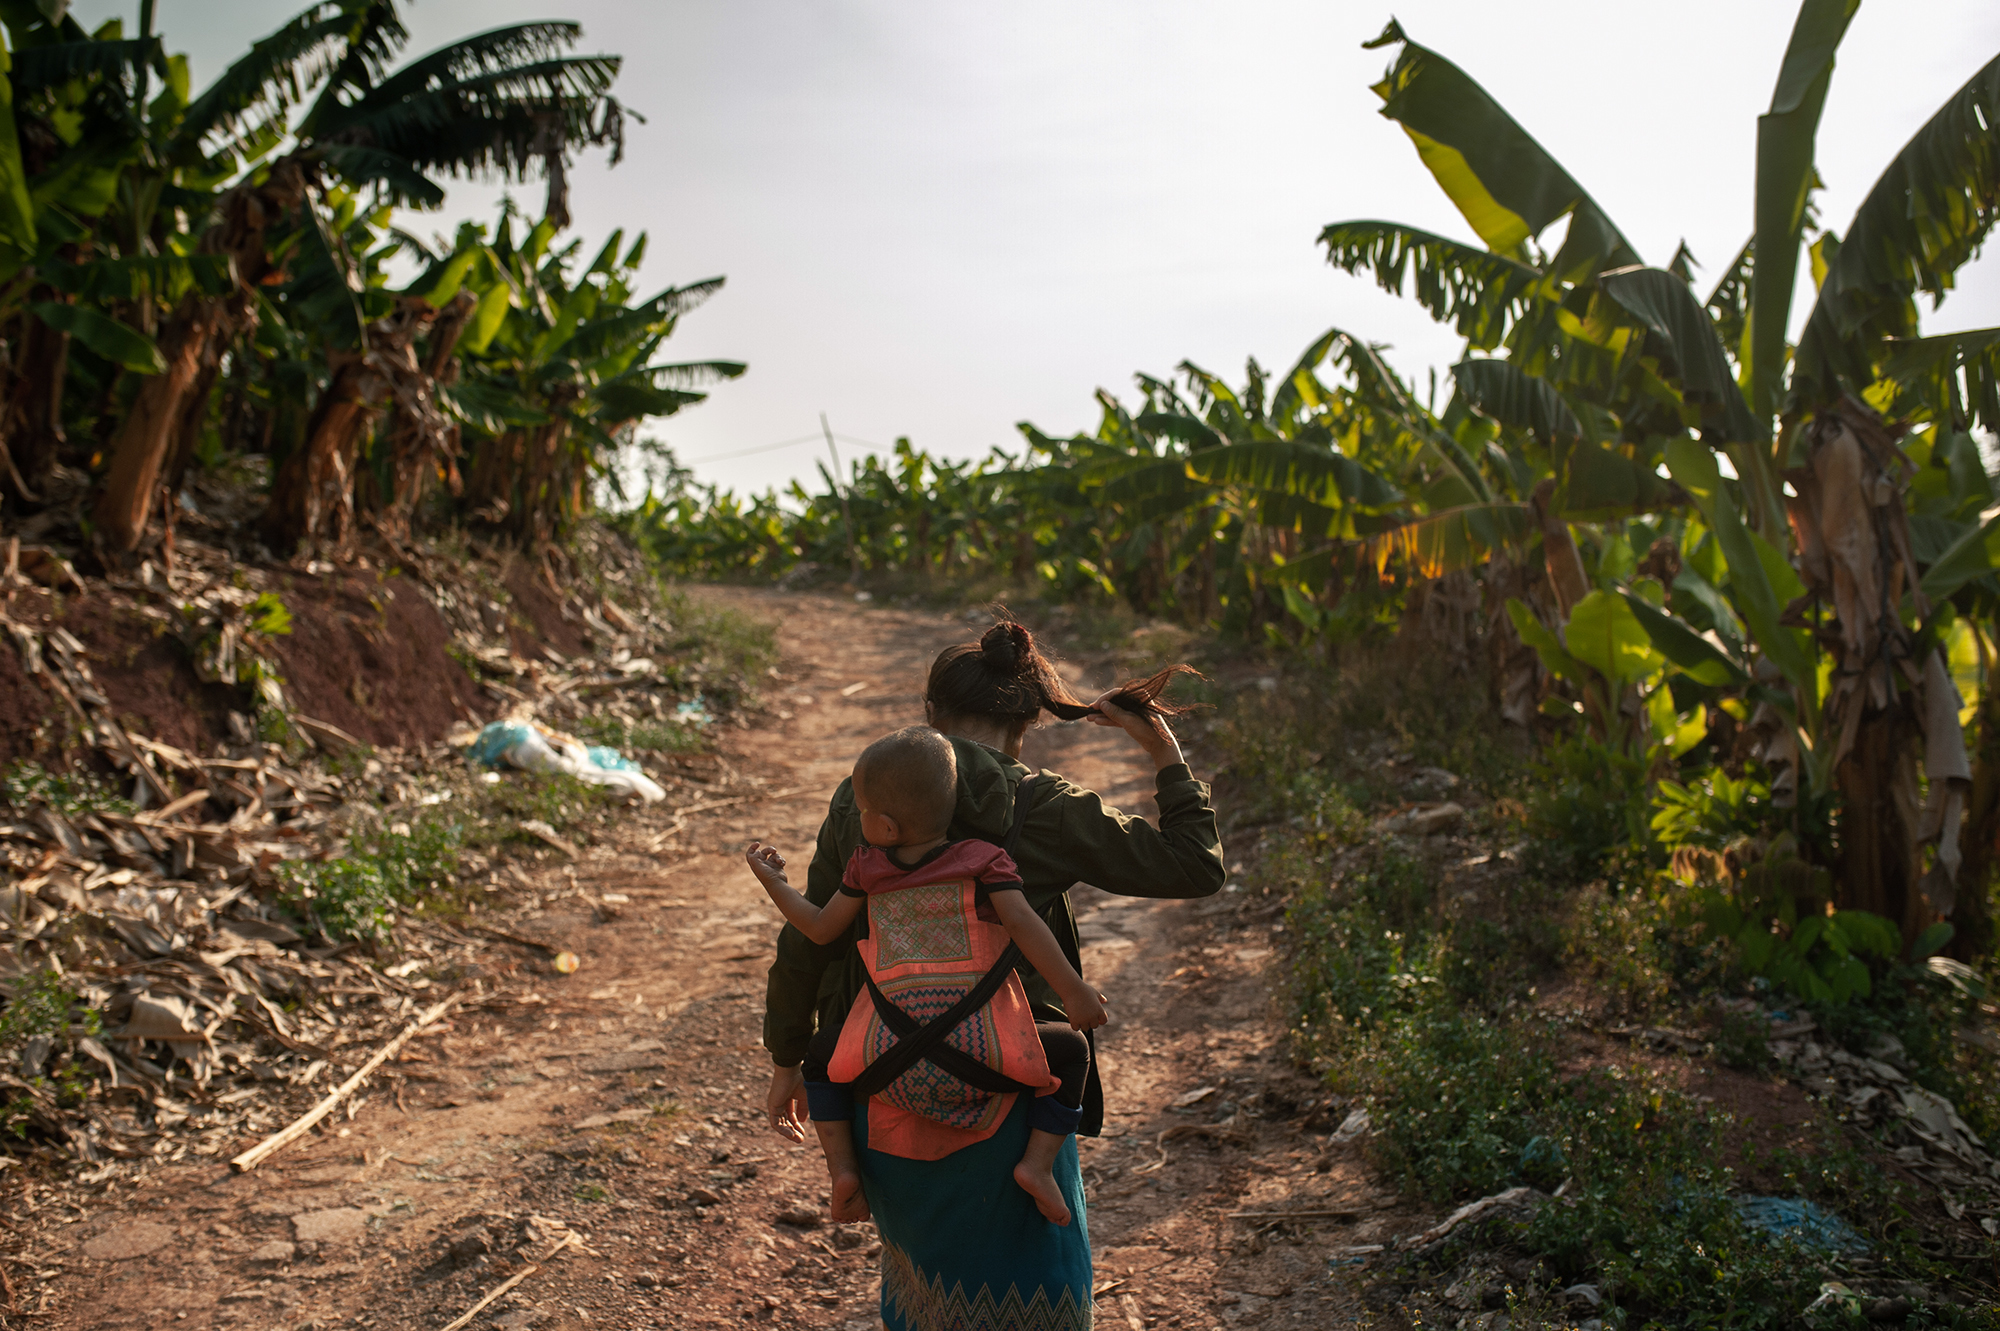 Mohin, 28, and her child on their way to the plantation; workers usually work every day from 7:30 am to 6:30 pm. (Image: Visarut Sankham/China Dialogue)